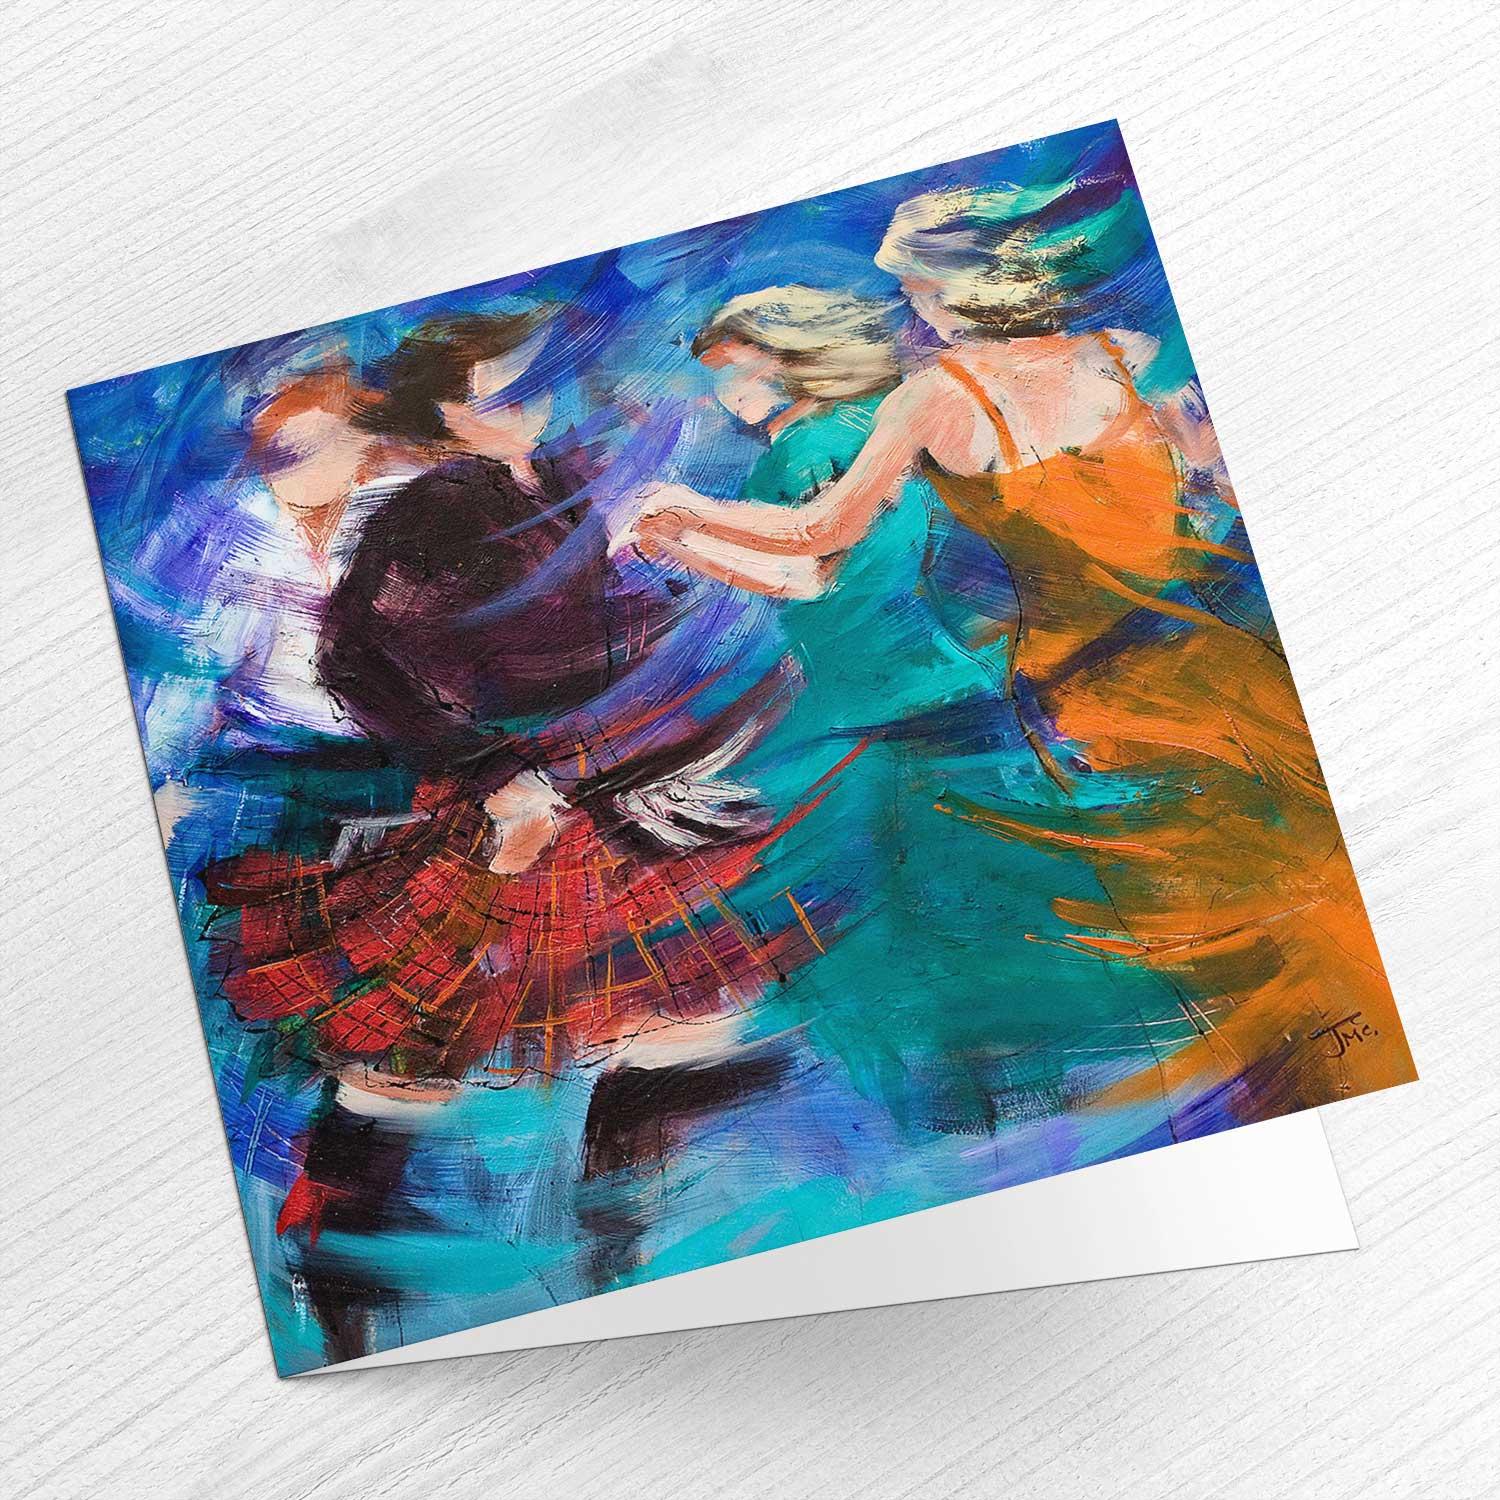 Jiggin Roon Greeting Card from an original painting by artist Janet McCrorie